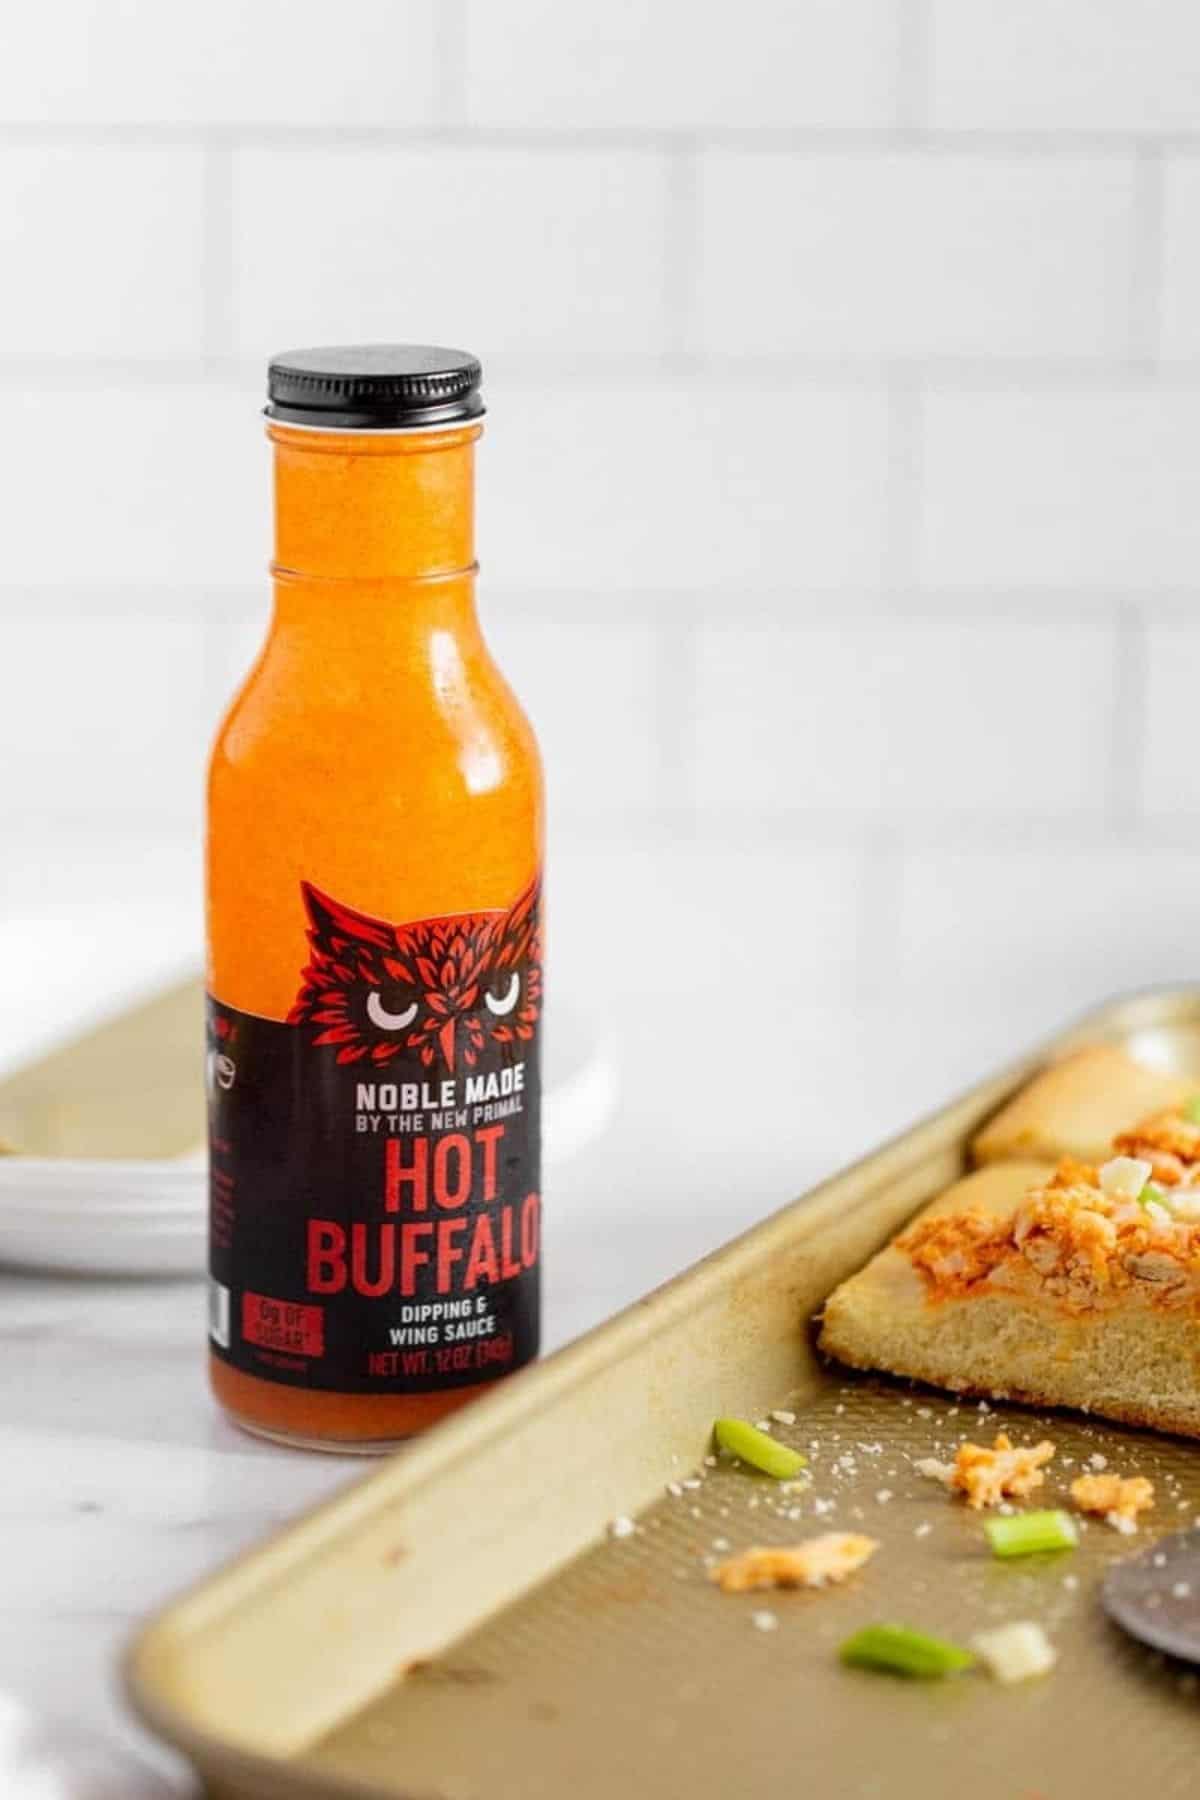 The new primal hot buffalo sauce and pizza